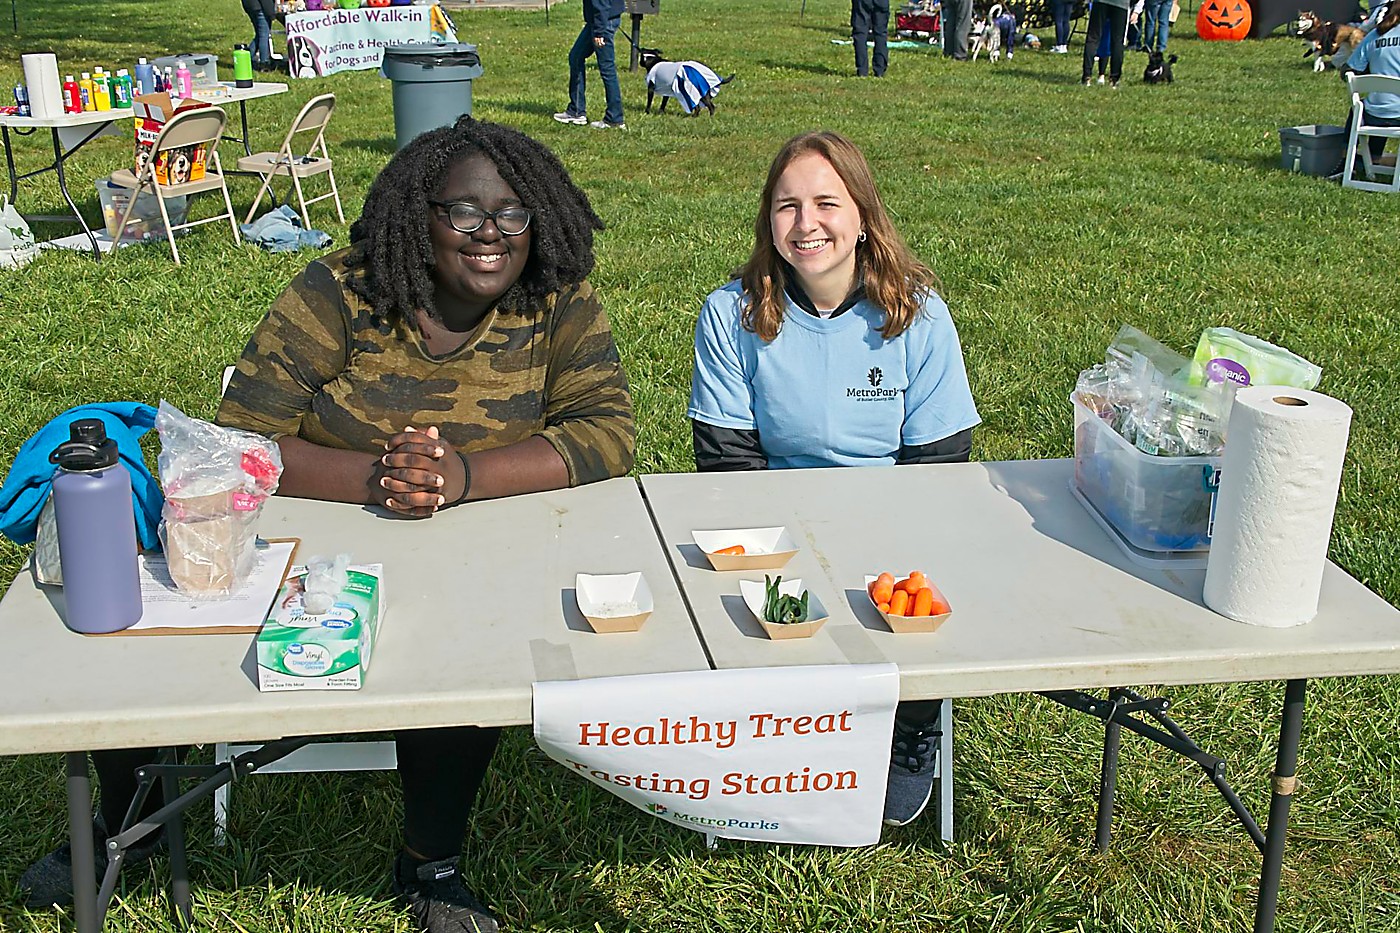 Volunteer at the Healthy Treat Tasting Station at The Howl